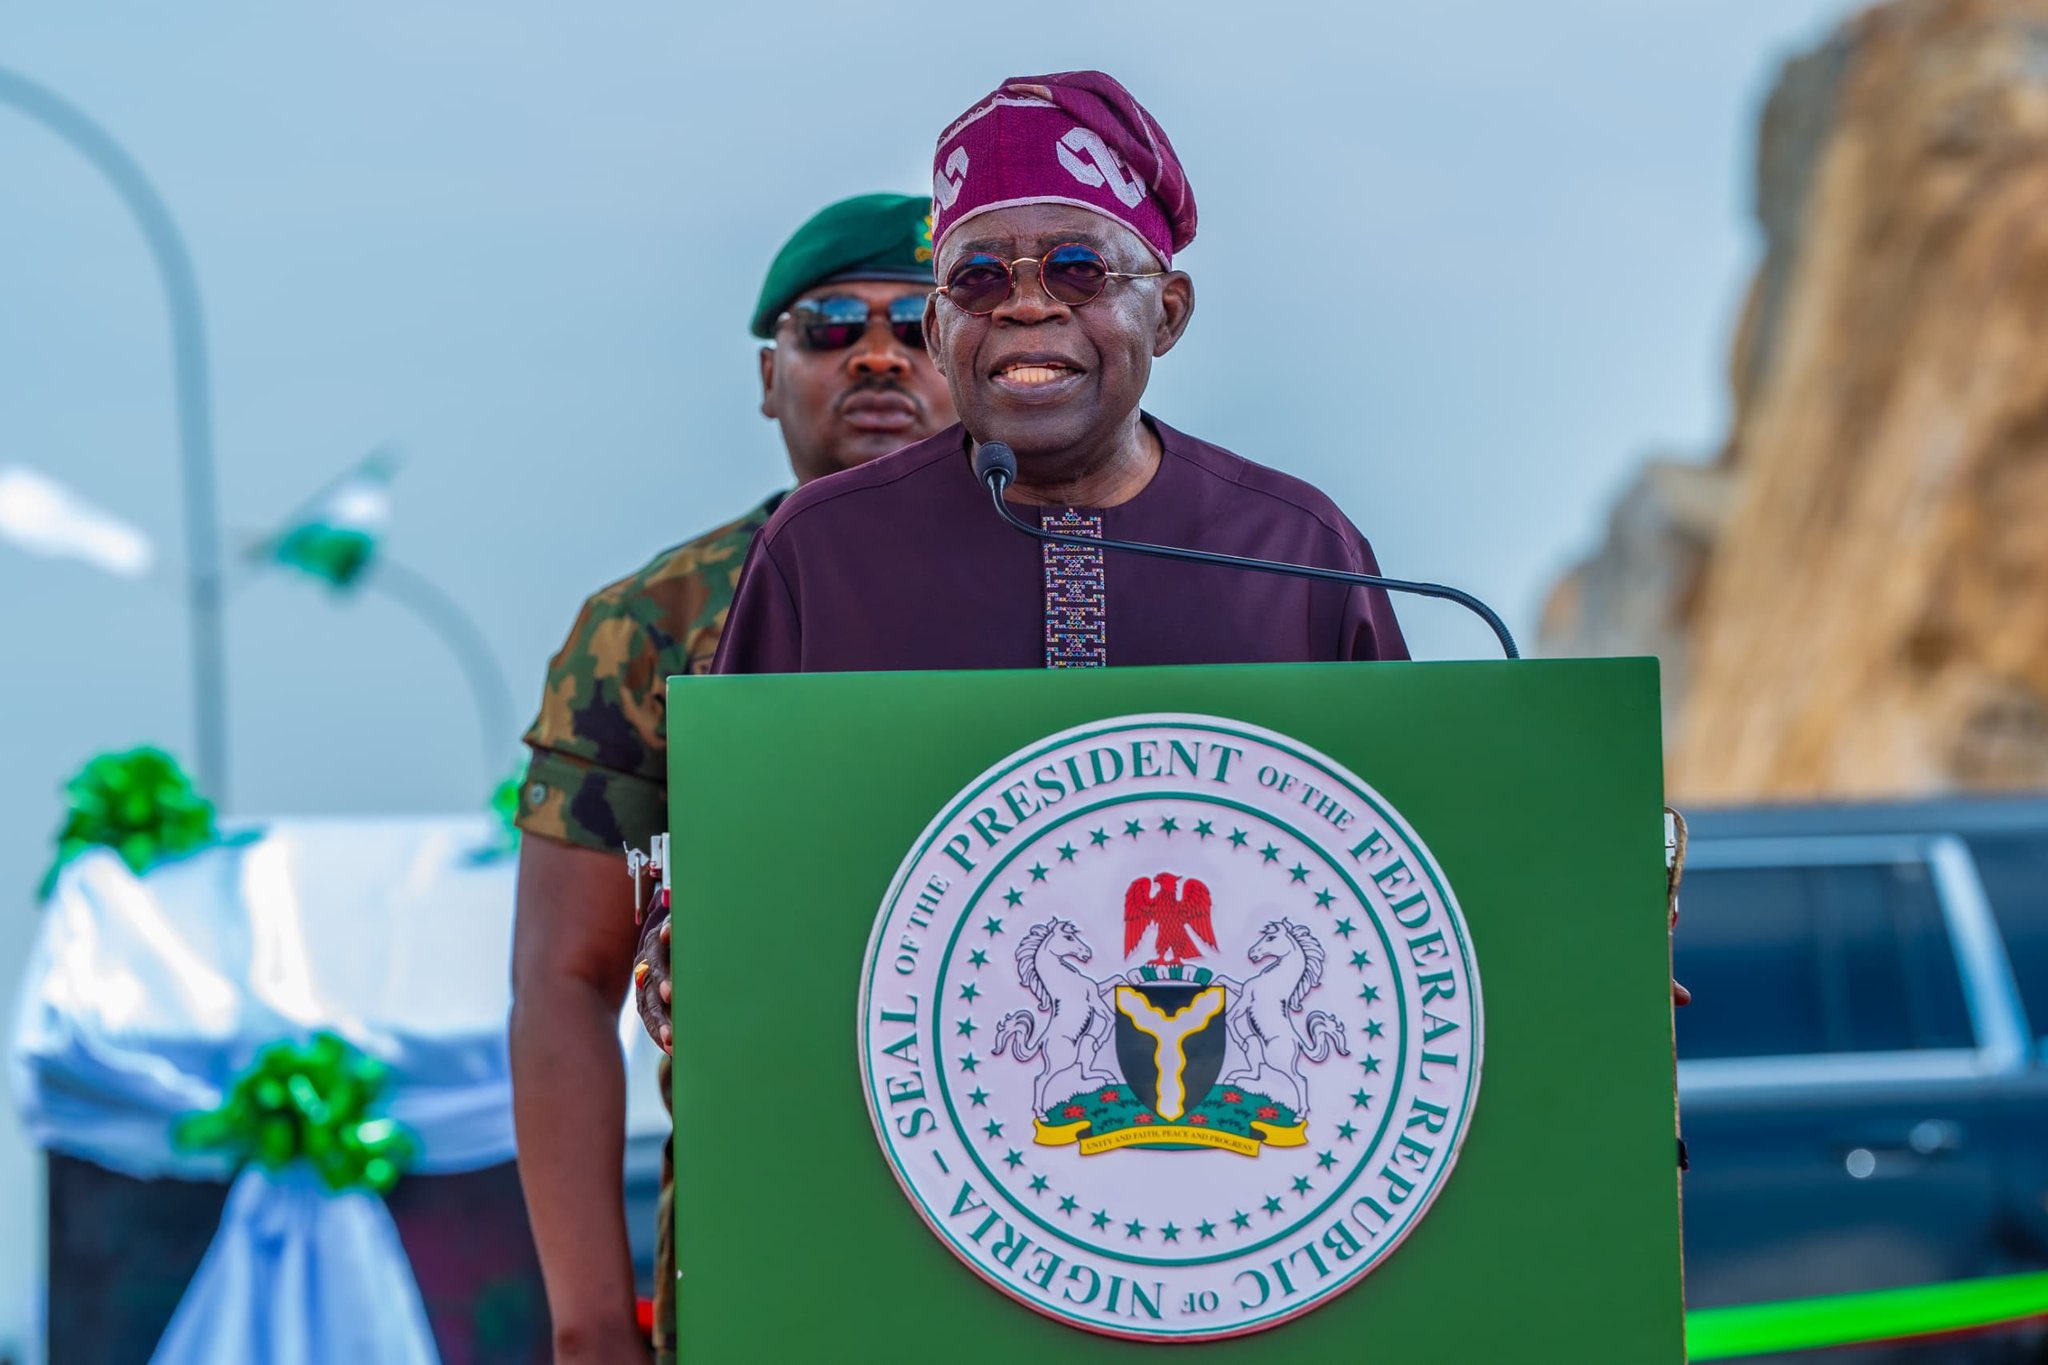 Incase you missed SEE FULL TEXT OF PRESIDENT BOLA AHMED TINUBU’S